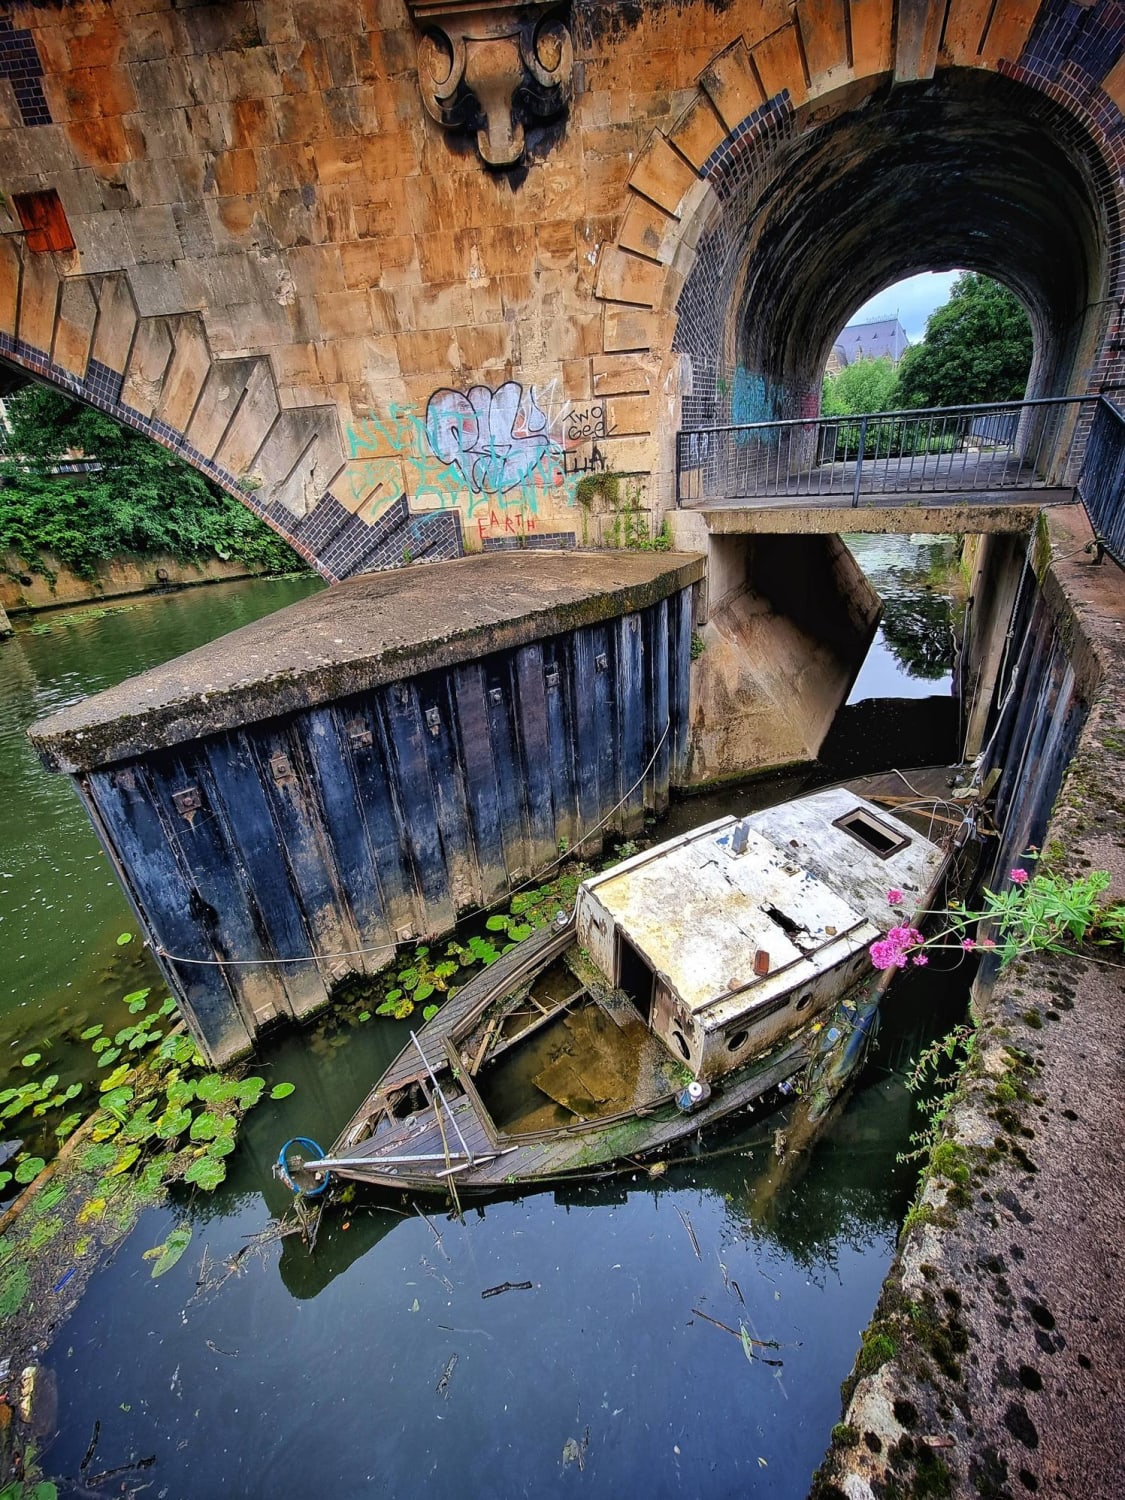 Abandoned Boat in the River Avon, Bath, UK.